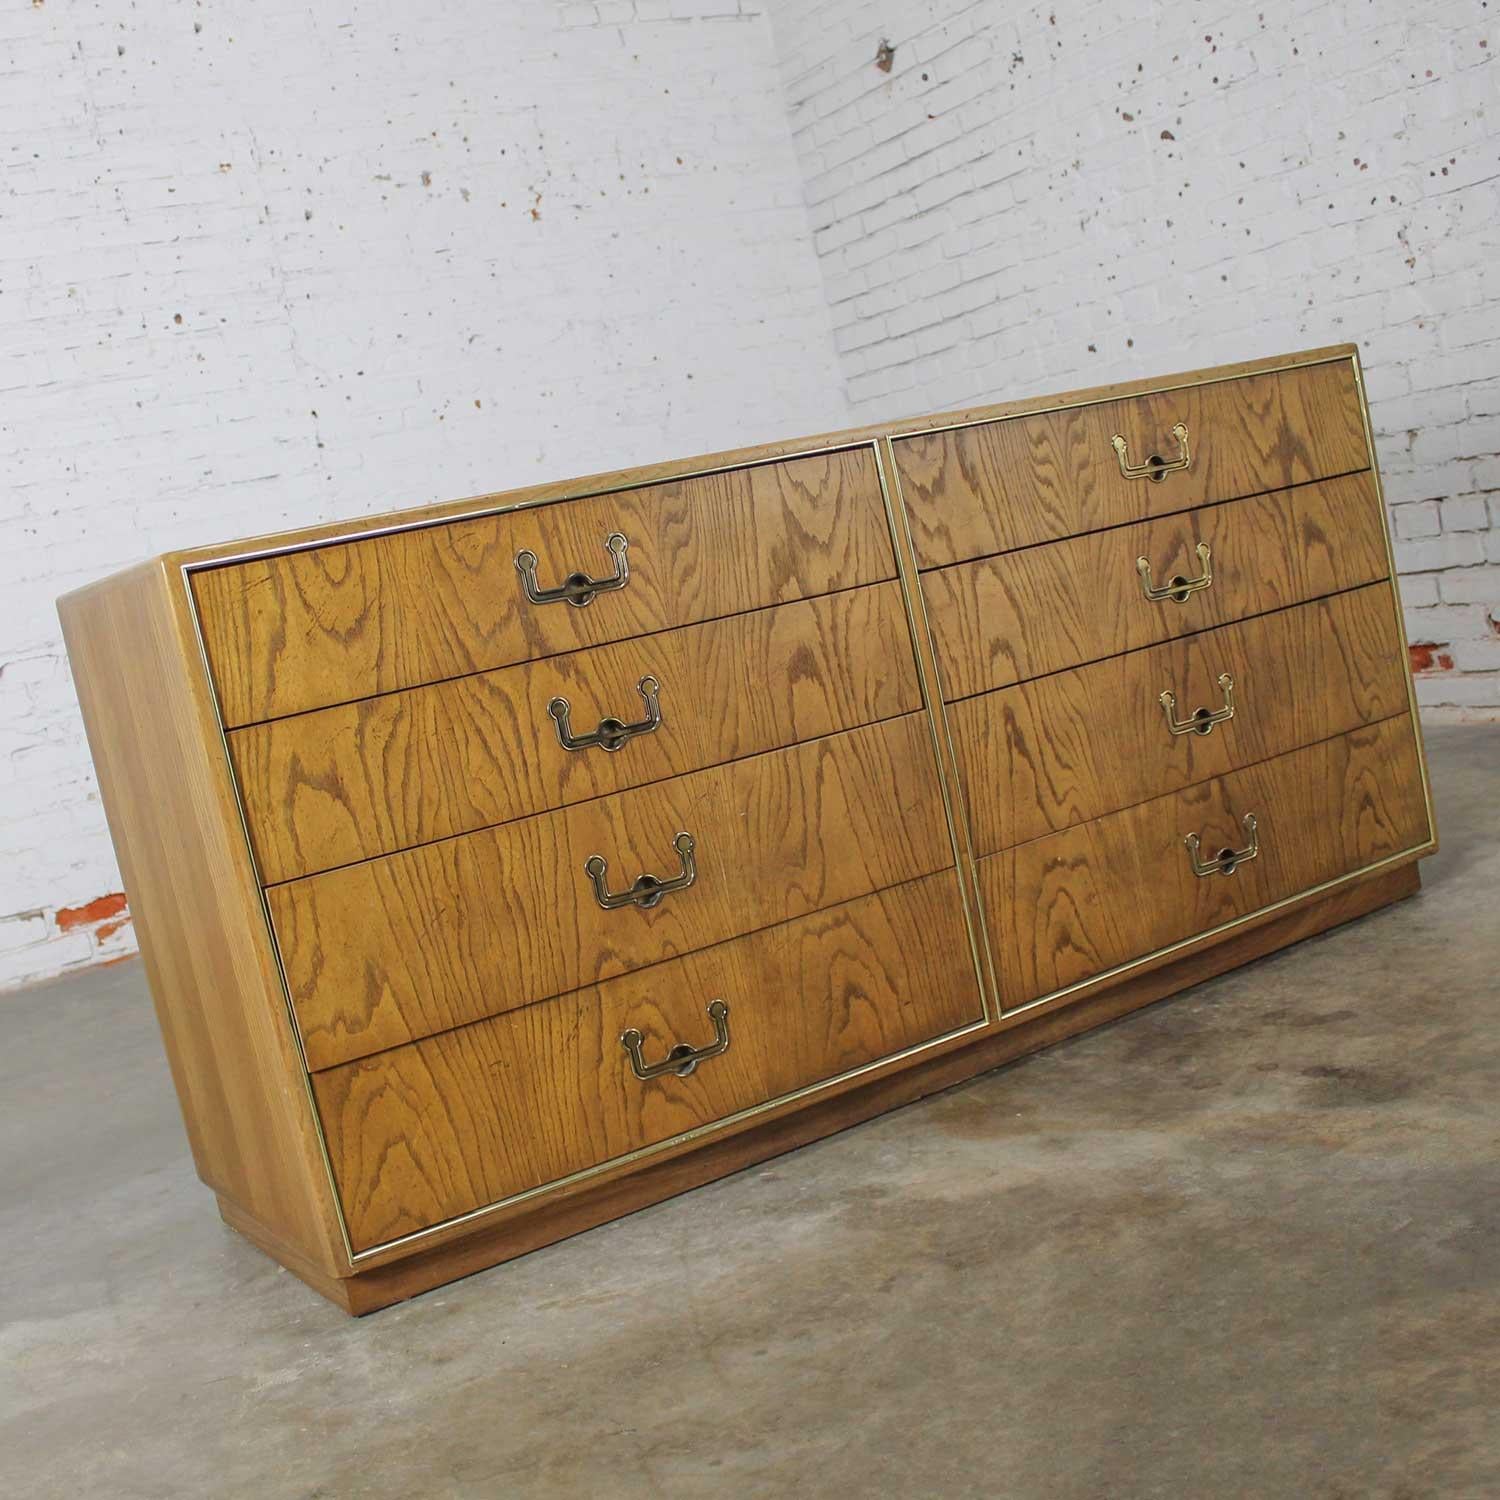 Wonderful vintage modern campaign style dresser by Founders Furniture comprised of book matched oak veneer & eight drawers with antique brass toned hardware and brass plated beading details. Beautiful condition, keeping in mind that this is vintage